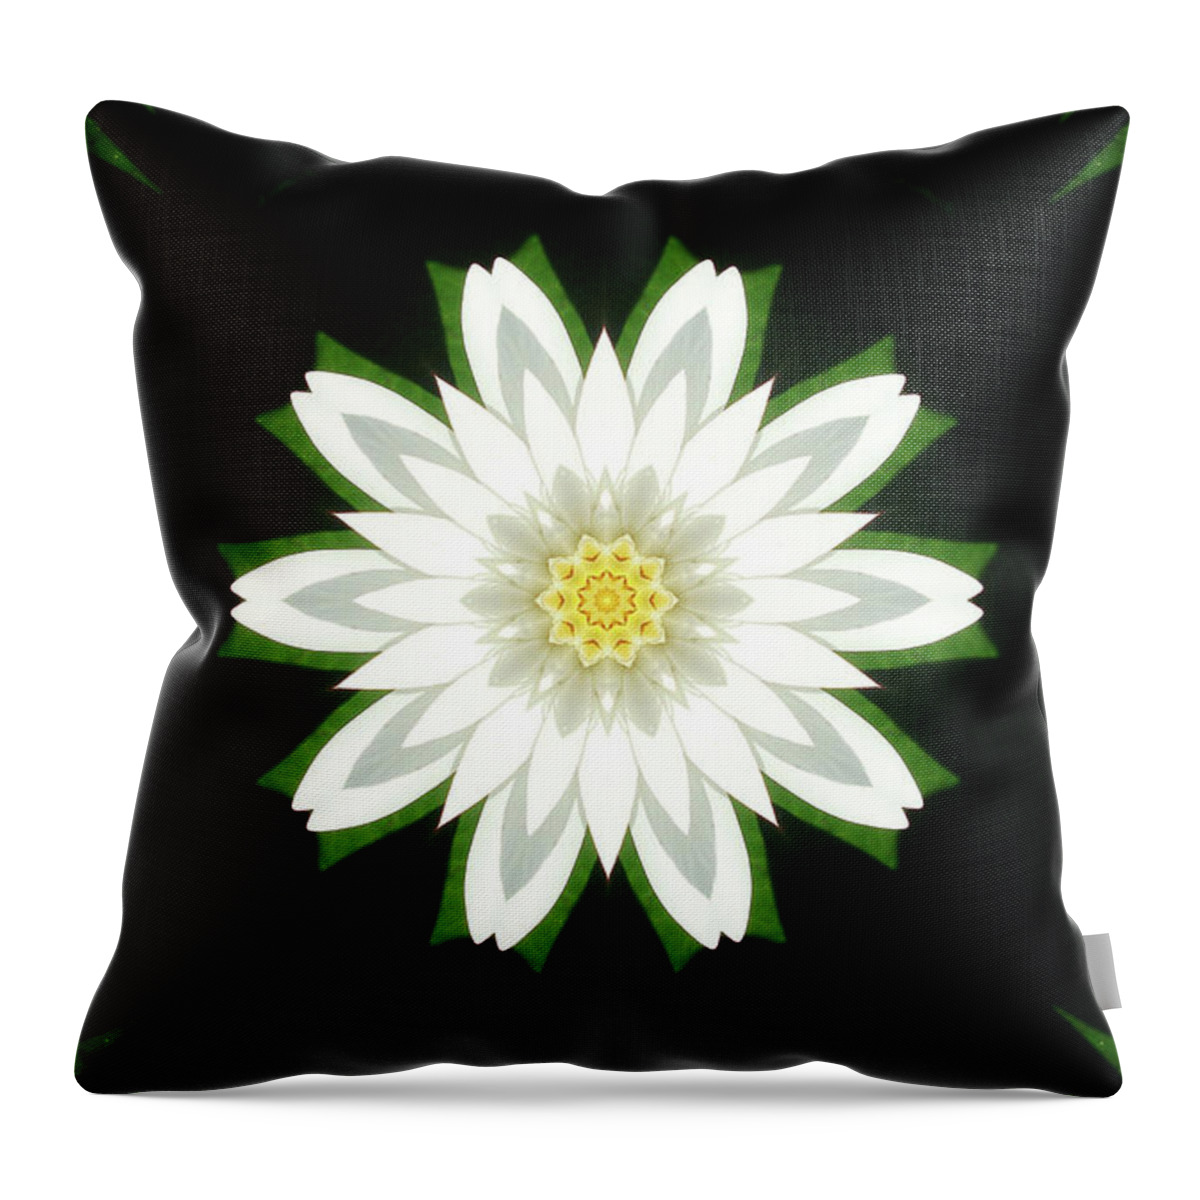 Psychedelic Art Throw Pillow featuring the digital art Psychedelic Flow by Caterina Christakos